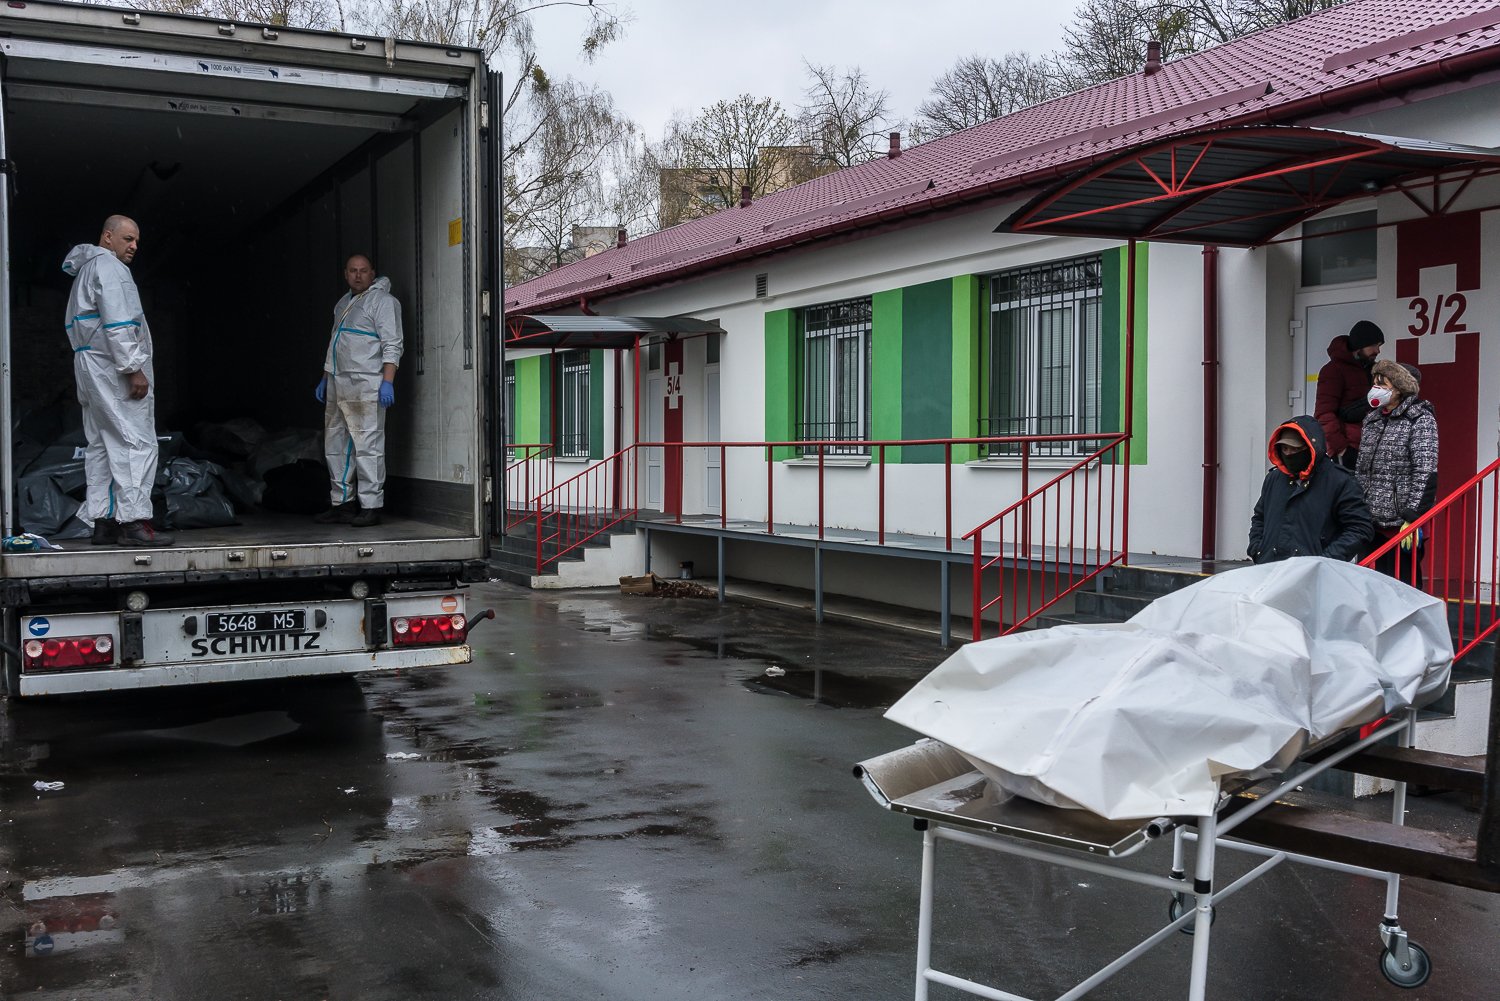  The bodies of civilians who died during the Russian occupation of the city are loaded into a trailer for storage until they can be identified and claimed by family members outside the morgue on Friday, April 22, 2022 in Bucha, Ukraine. 